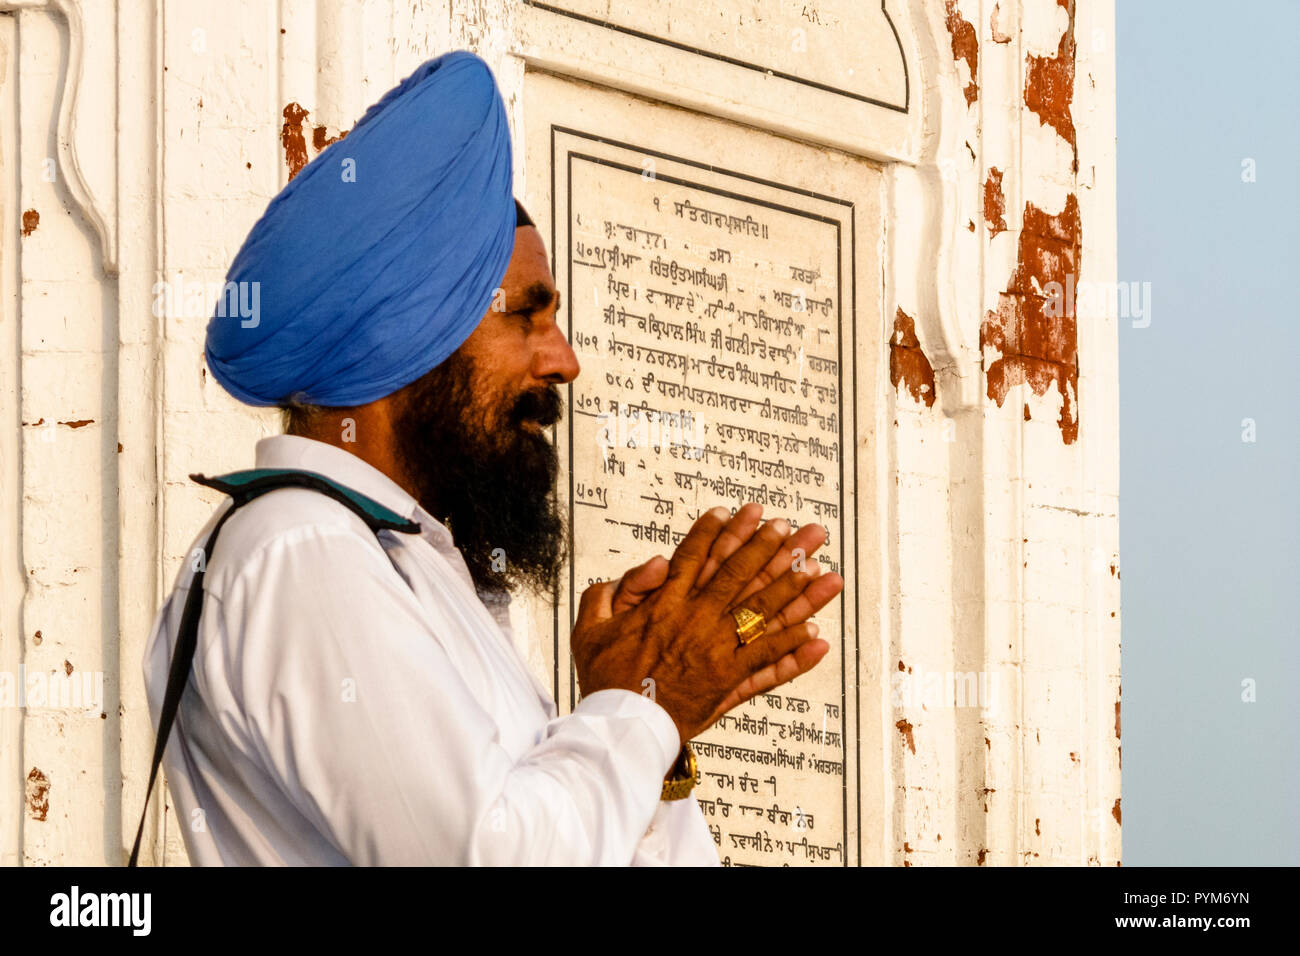 Sikh devotee praying at the entrance into the Golden Temple Complex Stock Photo